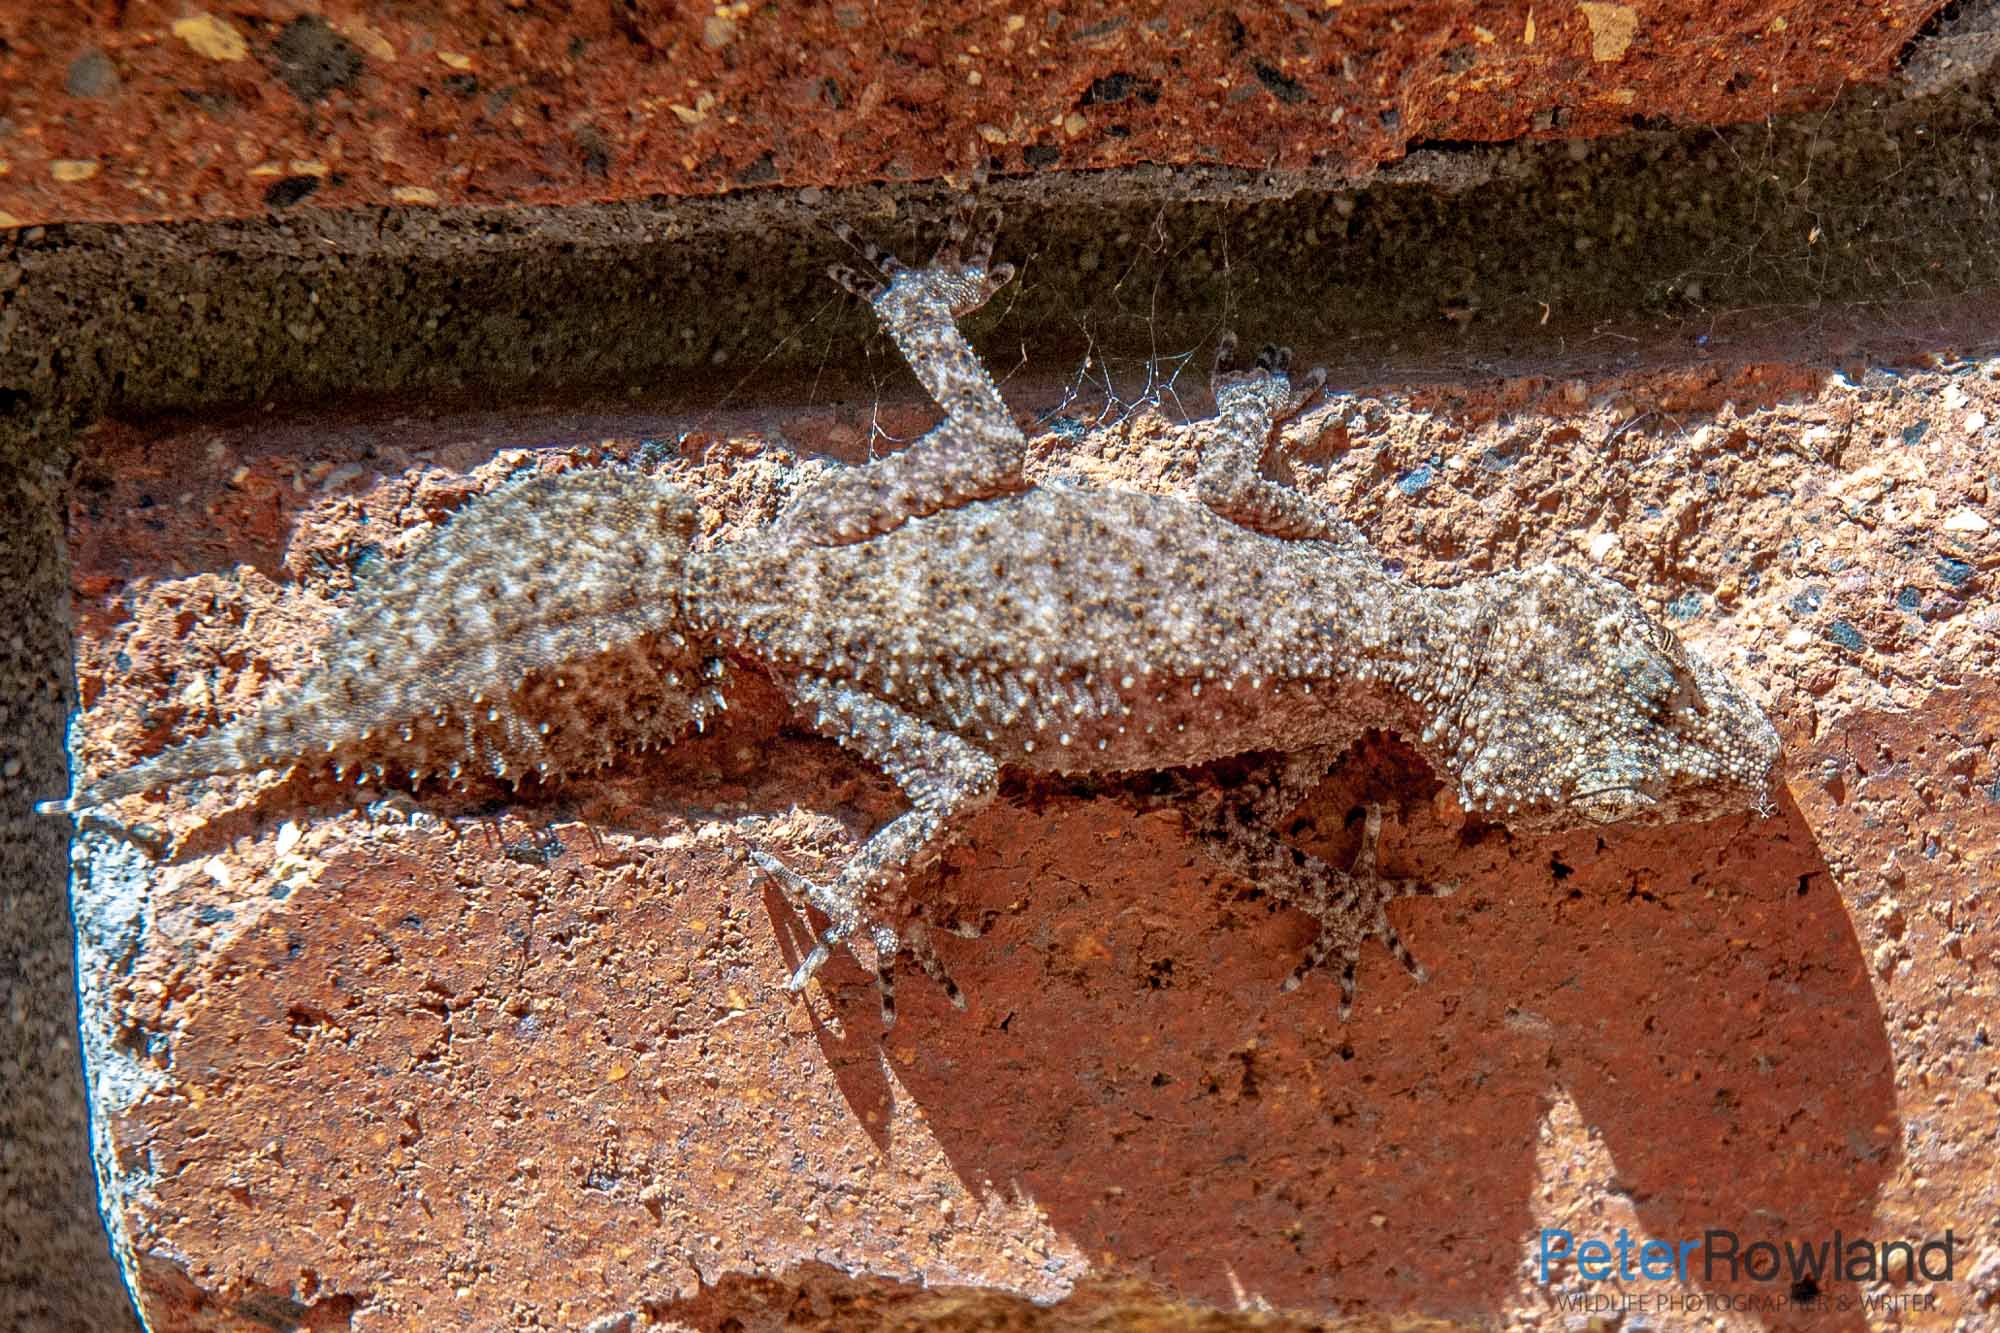 A Southern Leaf-tailed Gecko basking on a brick wall in NSW